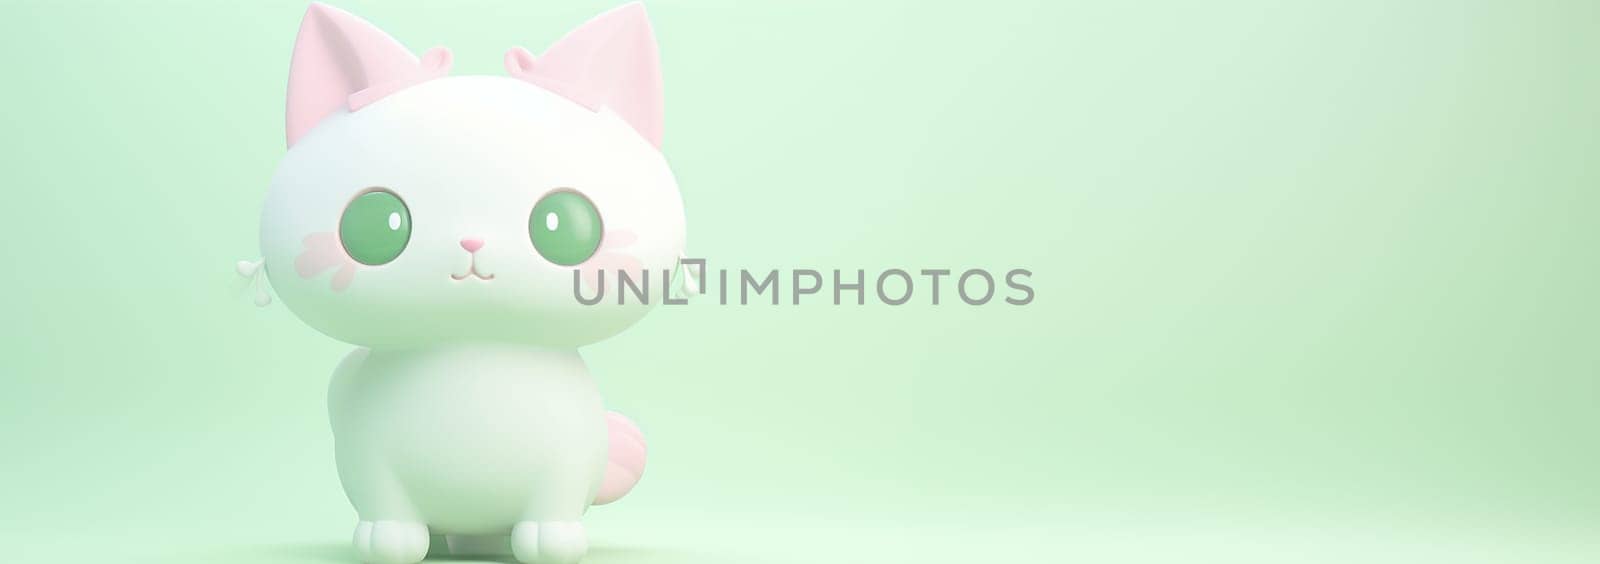 Cute little cat with a kind smiling face and big eyes. 3D Kitten in pastel color green and pink. Super cute pet illustration drawn in a cartoon 3d mesh style background Copy space Space for text